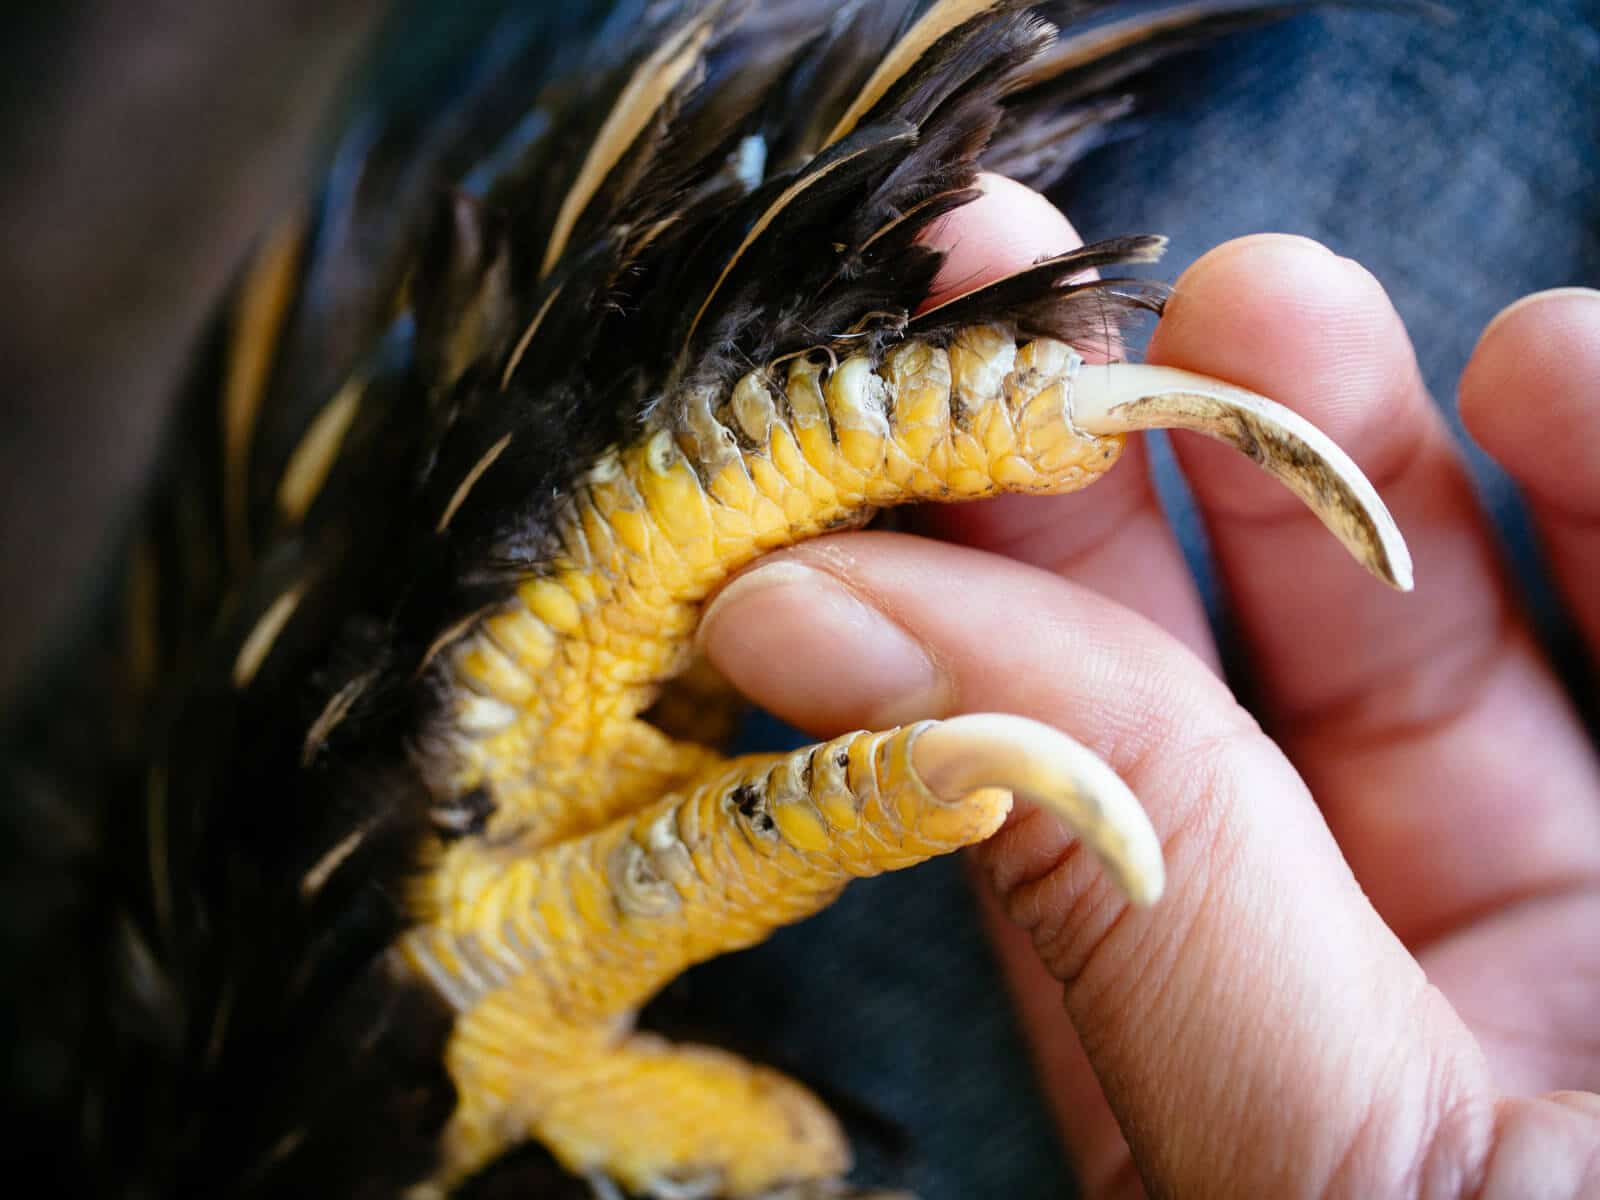 Overly long nails can cause pain for a chicken